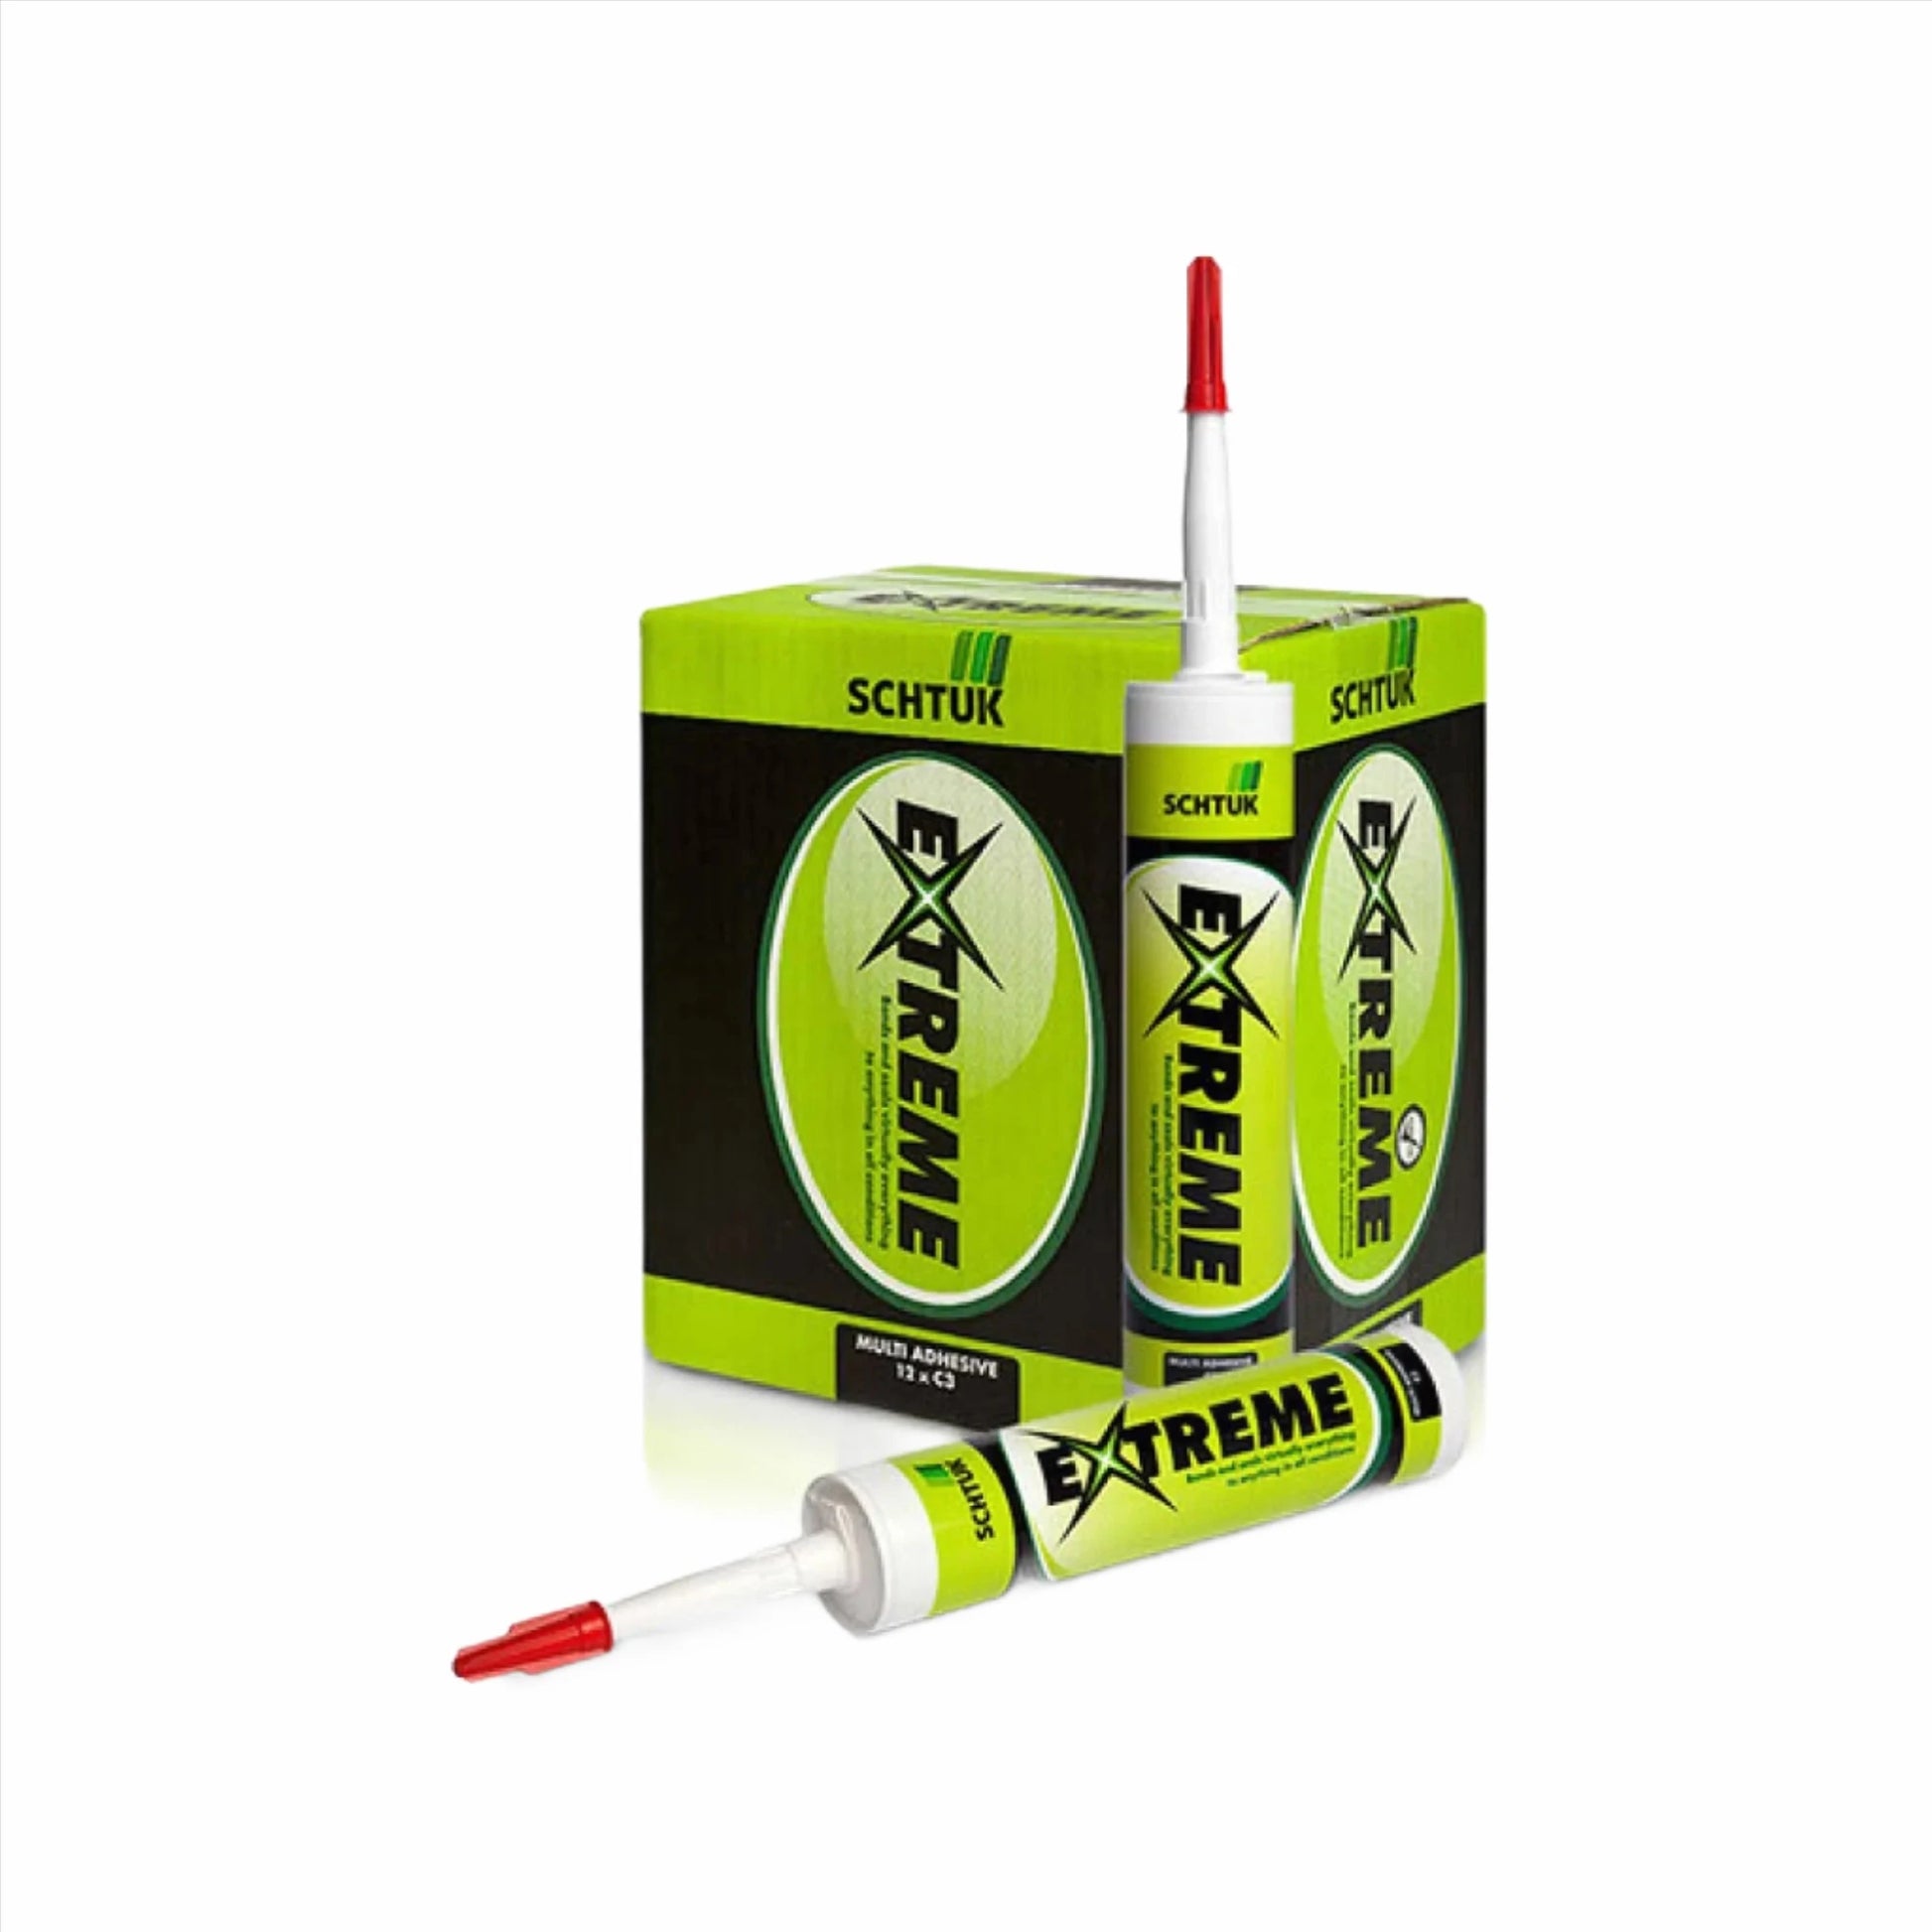 Schtuk Extreme Clear Sealant Adhesive - works in all weathers and applications, comes in a 290ml cartridge.